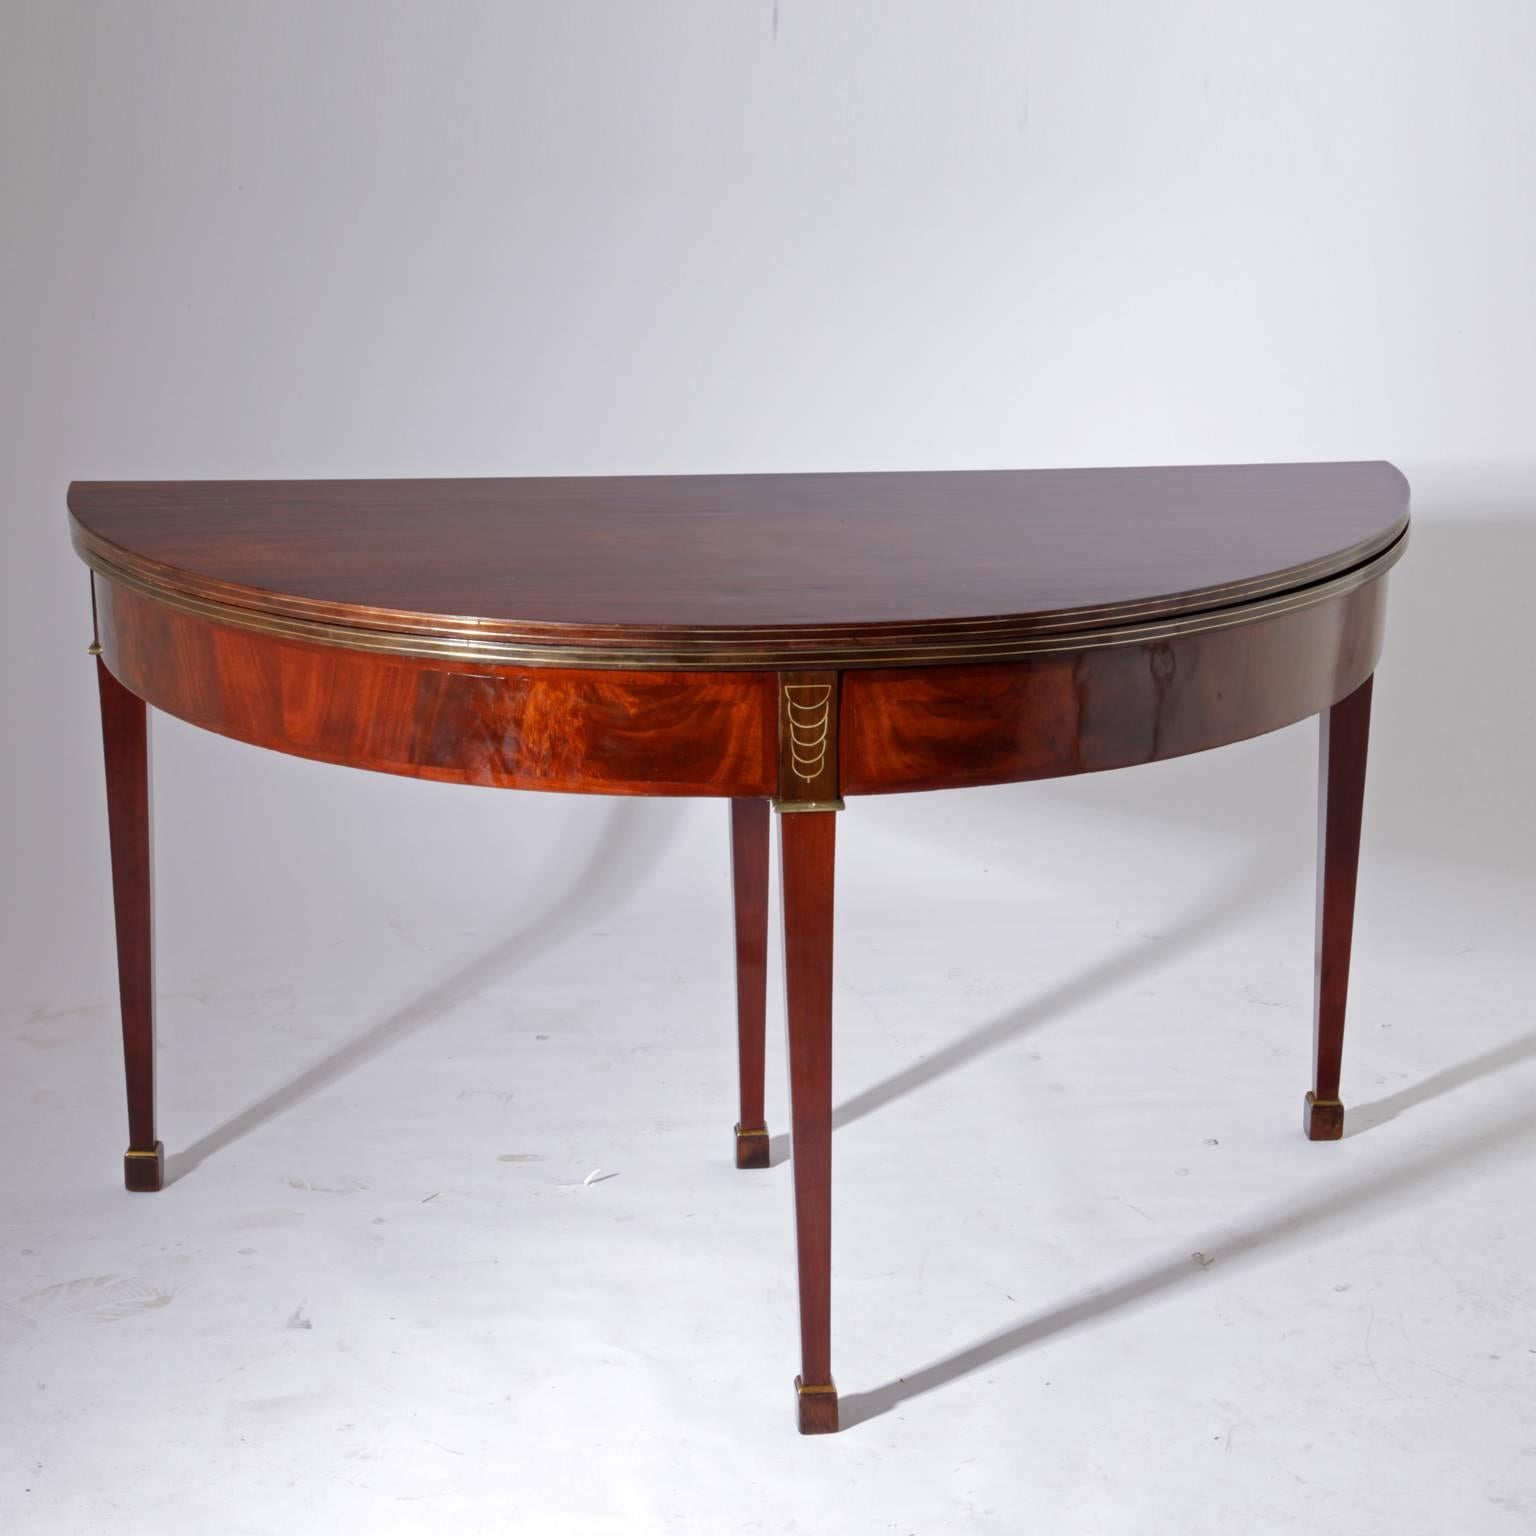 Mahogany Louis Seize Demilune Table by J.-J. Chapuis, Belgium, Late 18th Century For Sale